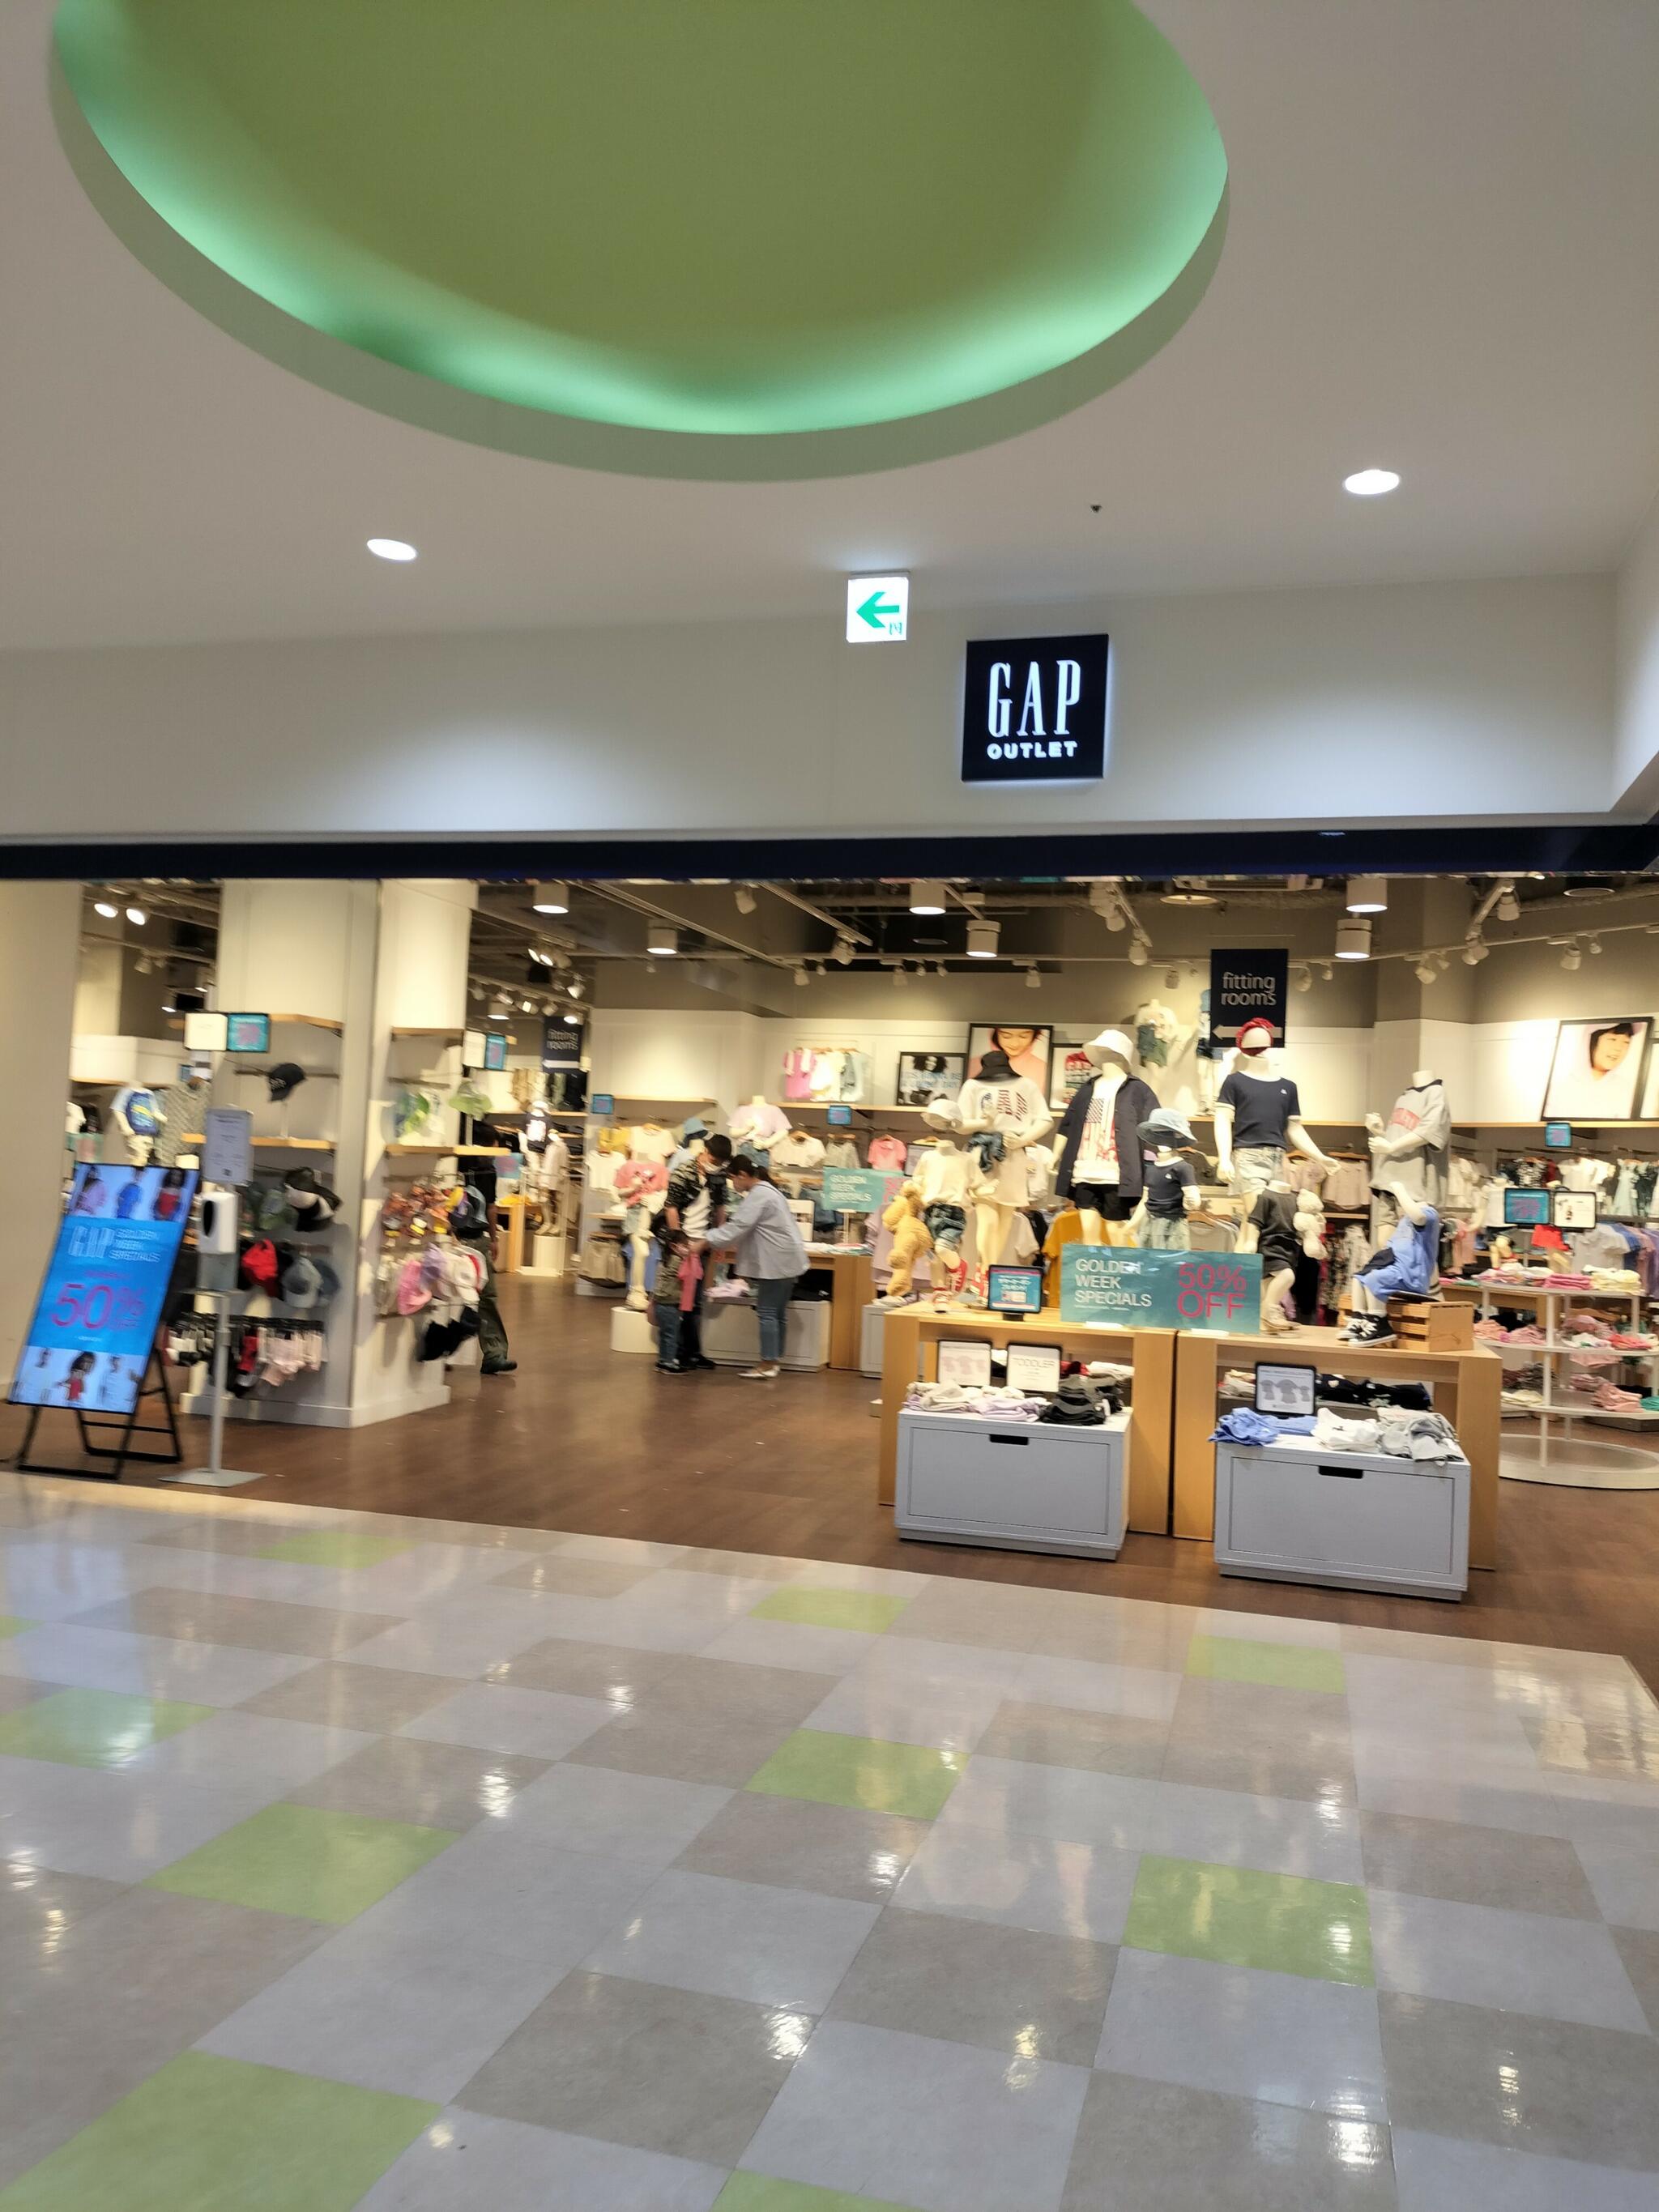 GAP Outlet 島忠ホームズ草加舎人店の代表写真7